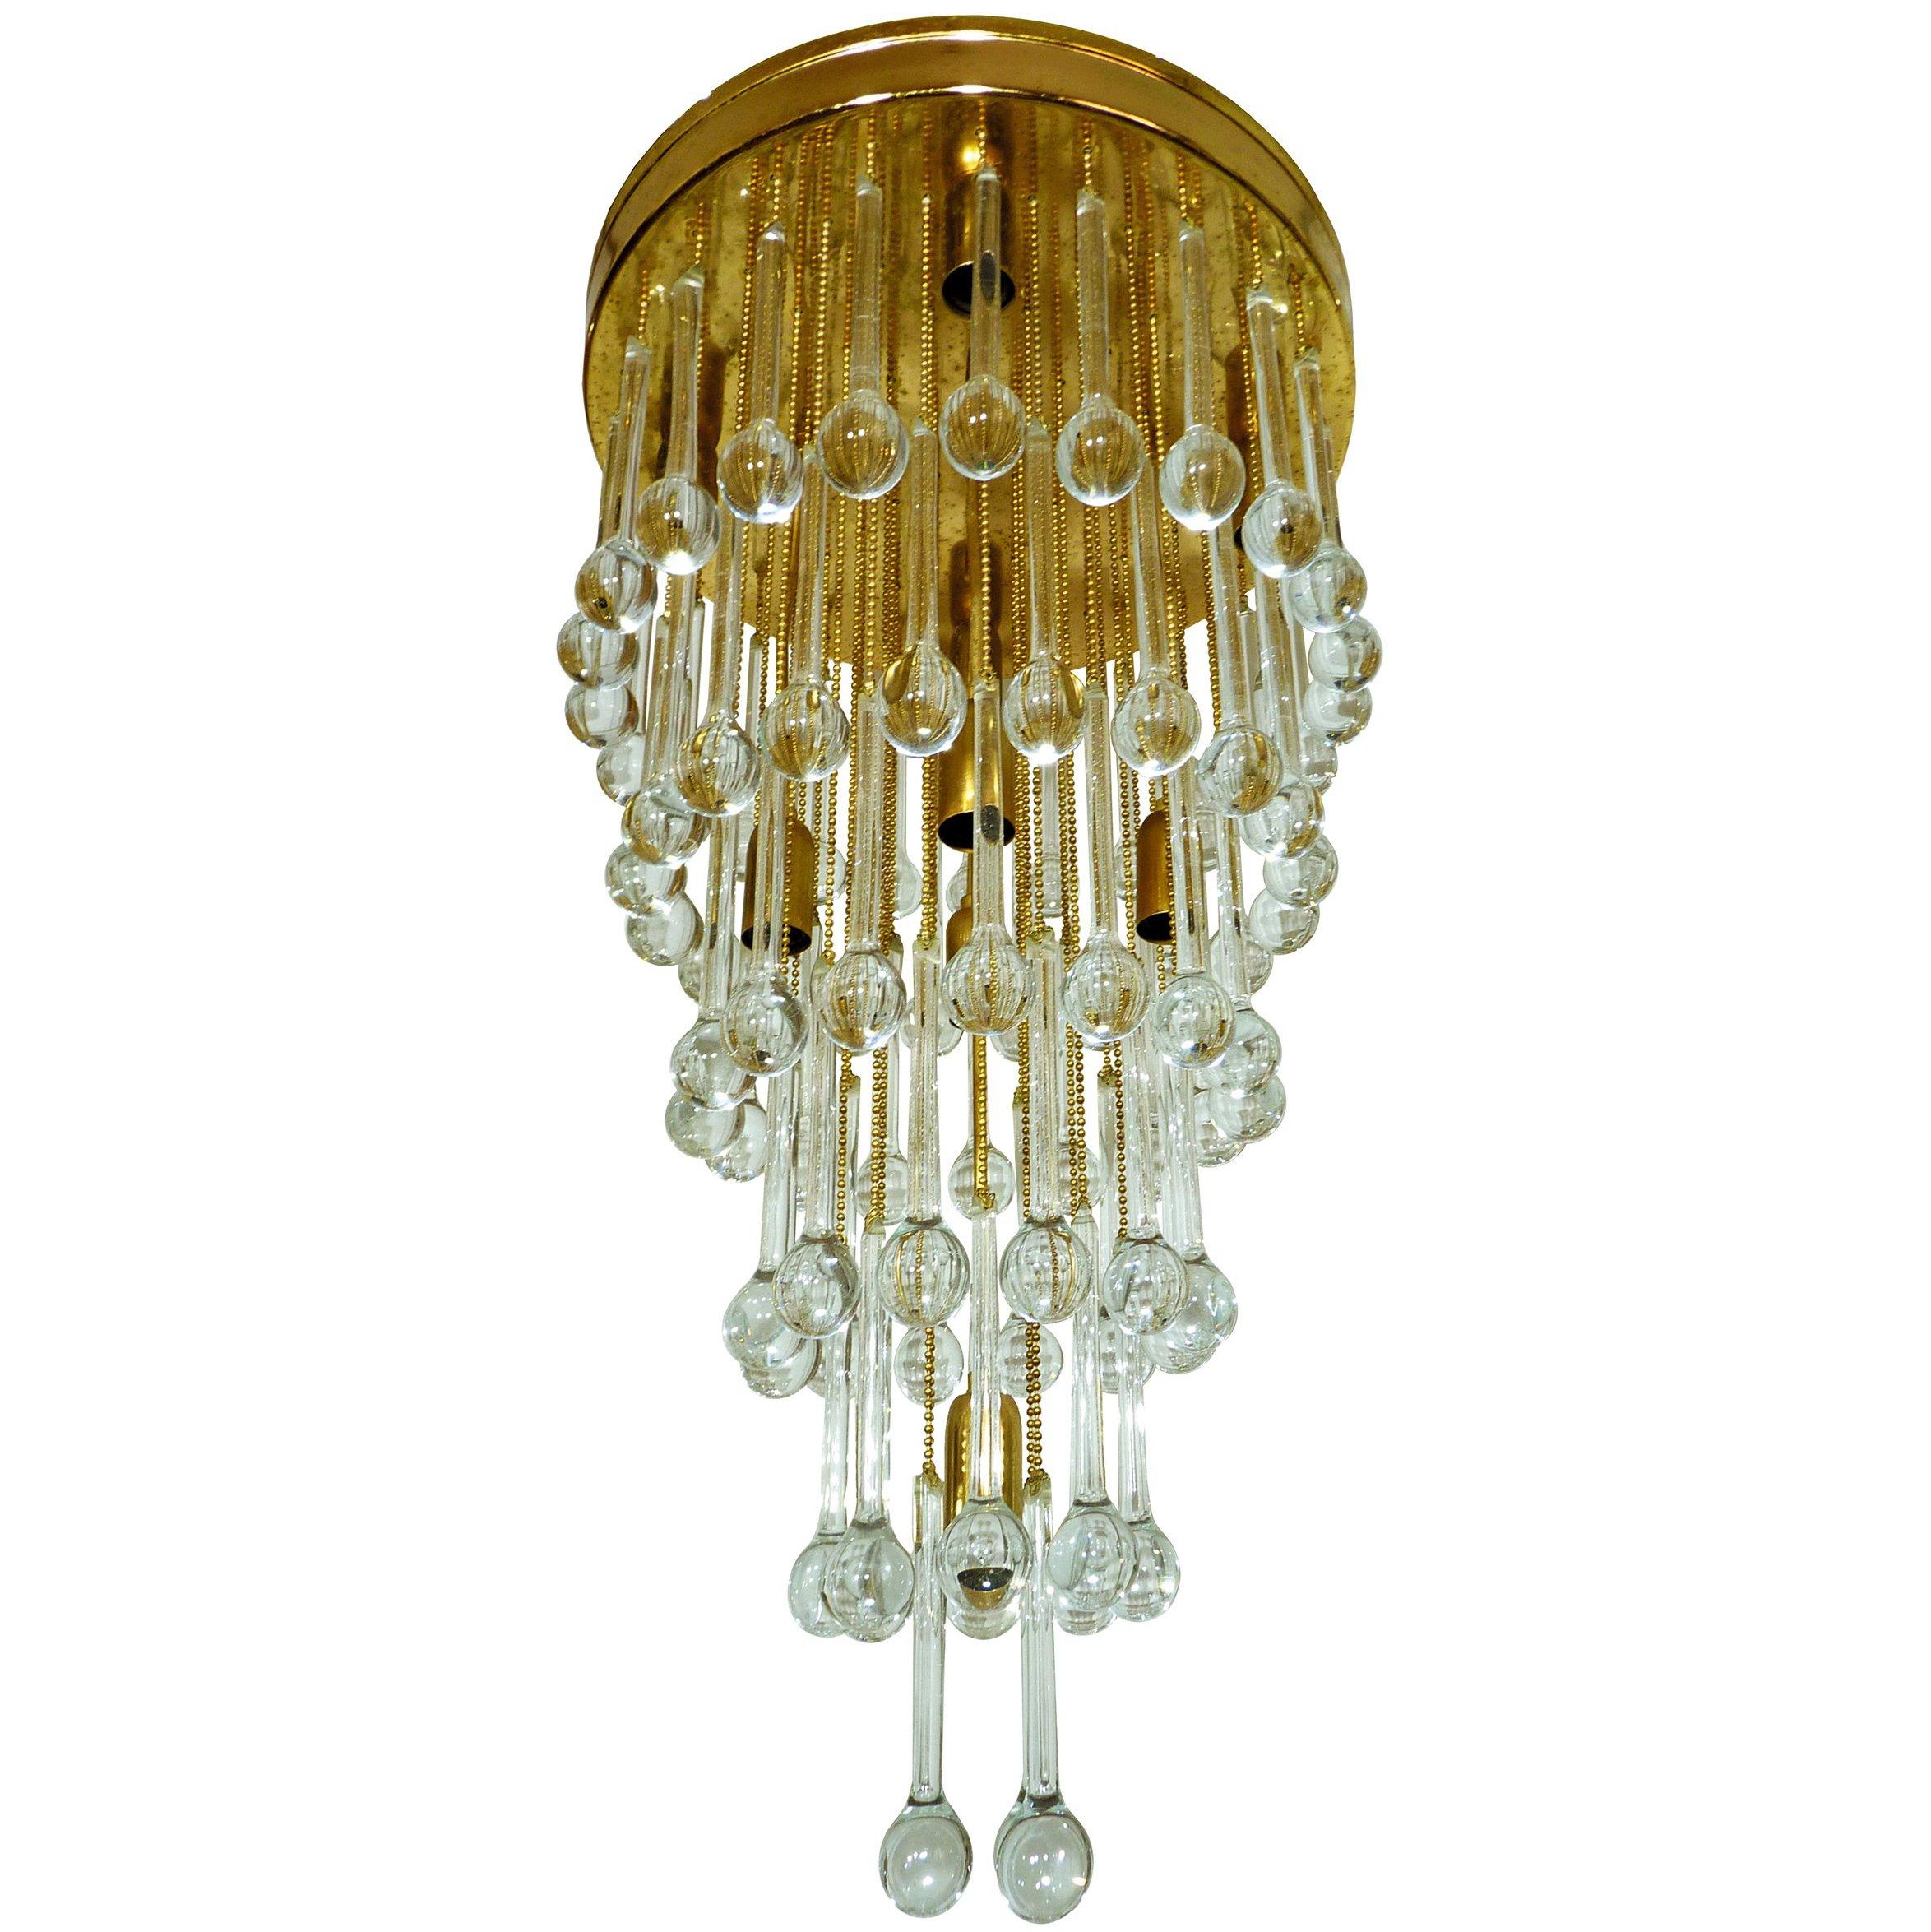 Stunning crystal waterfall wedding cake chandelier with nine-light flushmount chandelier, attributed to Ernst Palme. The piece is gold-plated and detailed with six layers of clear crystal elongated teardrop shaped prisms.
Measures:
Diameter 16 in /